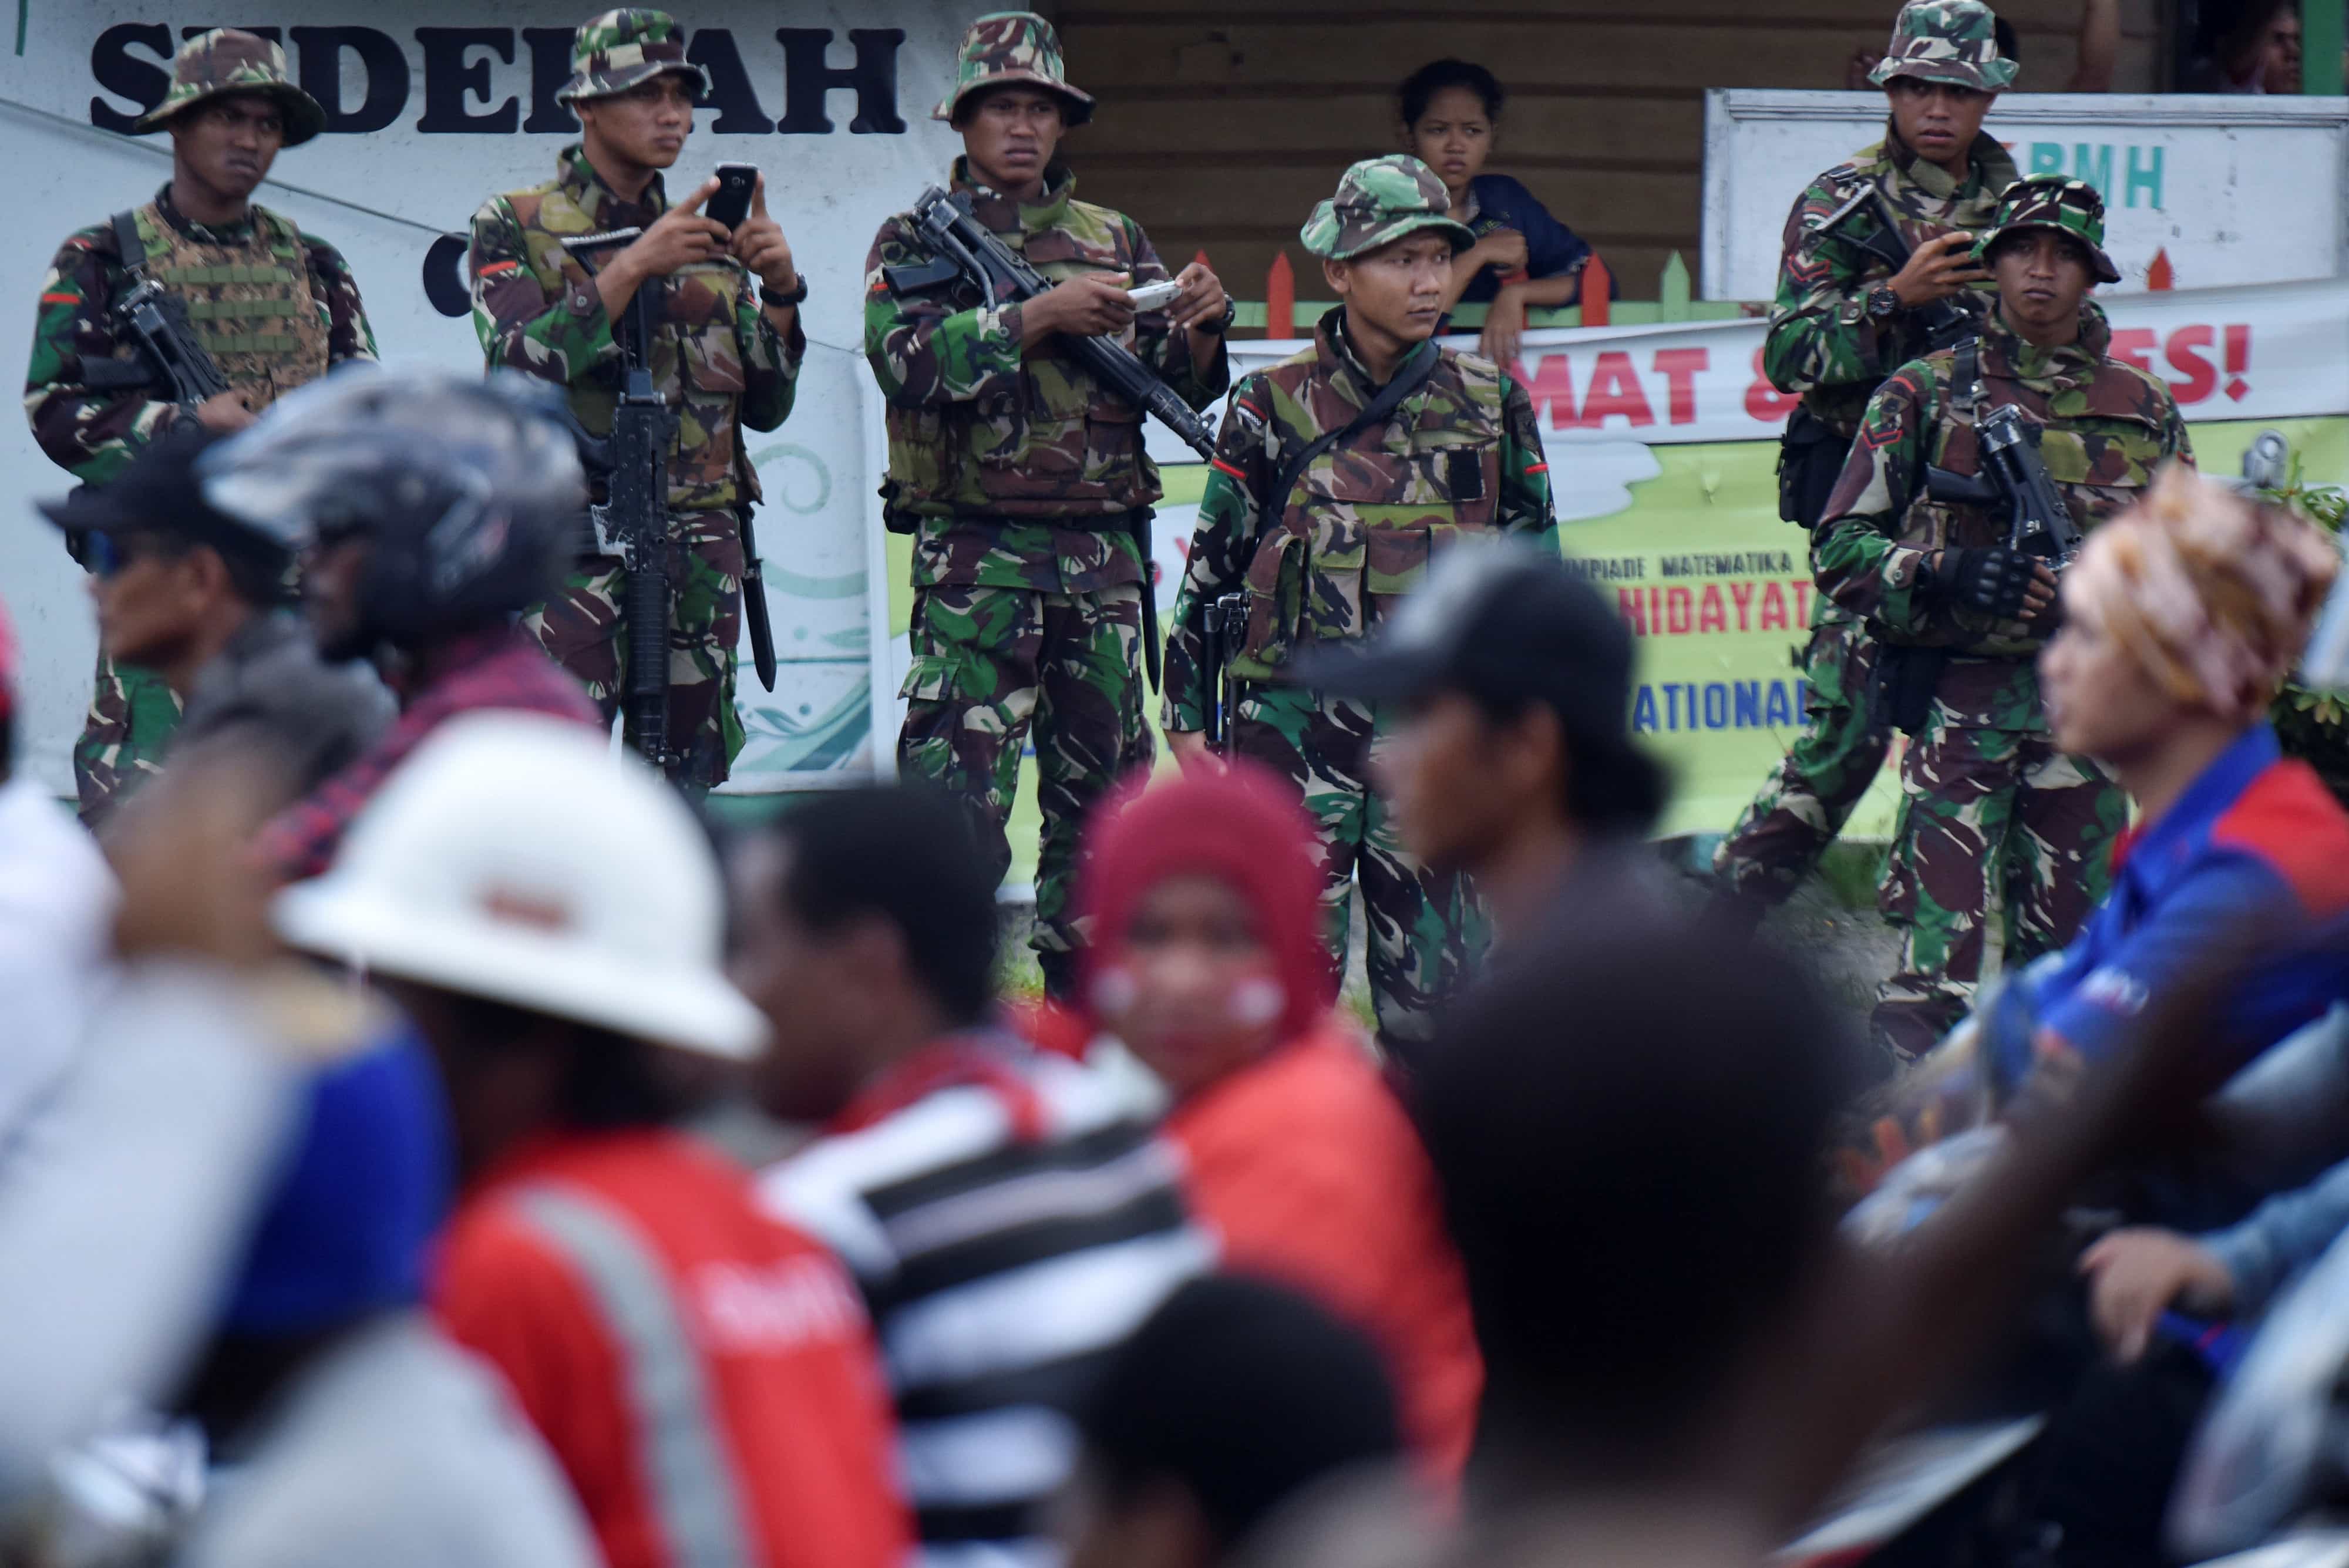 Indonesian soldiers watch as workers and contractors from the PT Freeport mining company travel in a convoy during a rally commemorating May Day in Timika, Papua province, 1 May 2017 , Antara Foto/Wahyu Putro A/via REUTERS